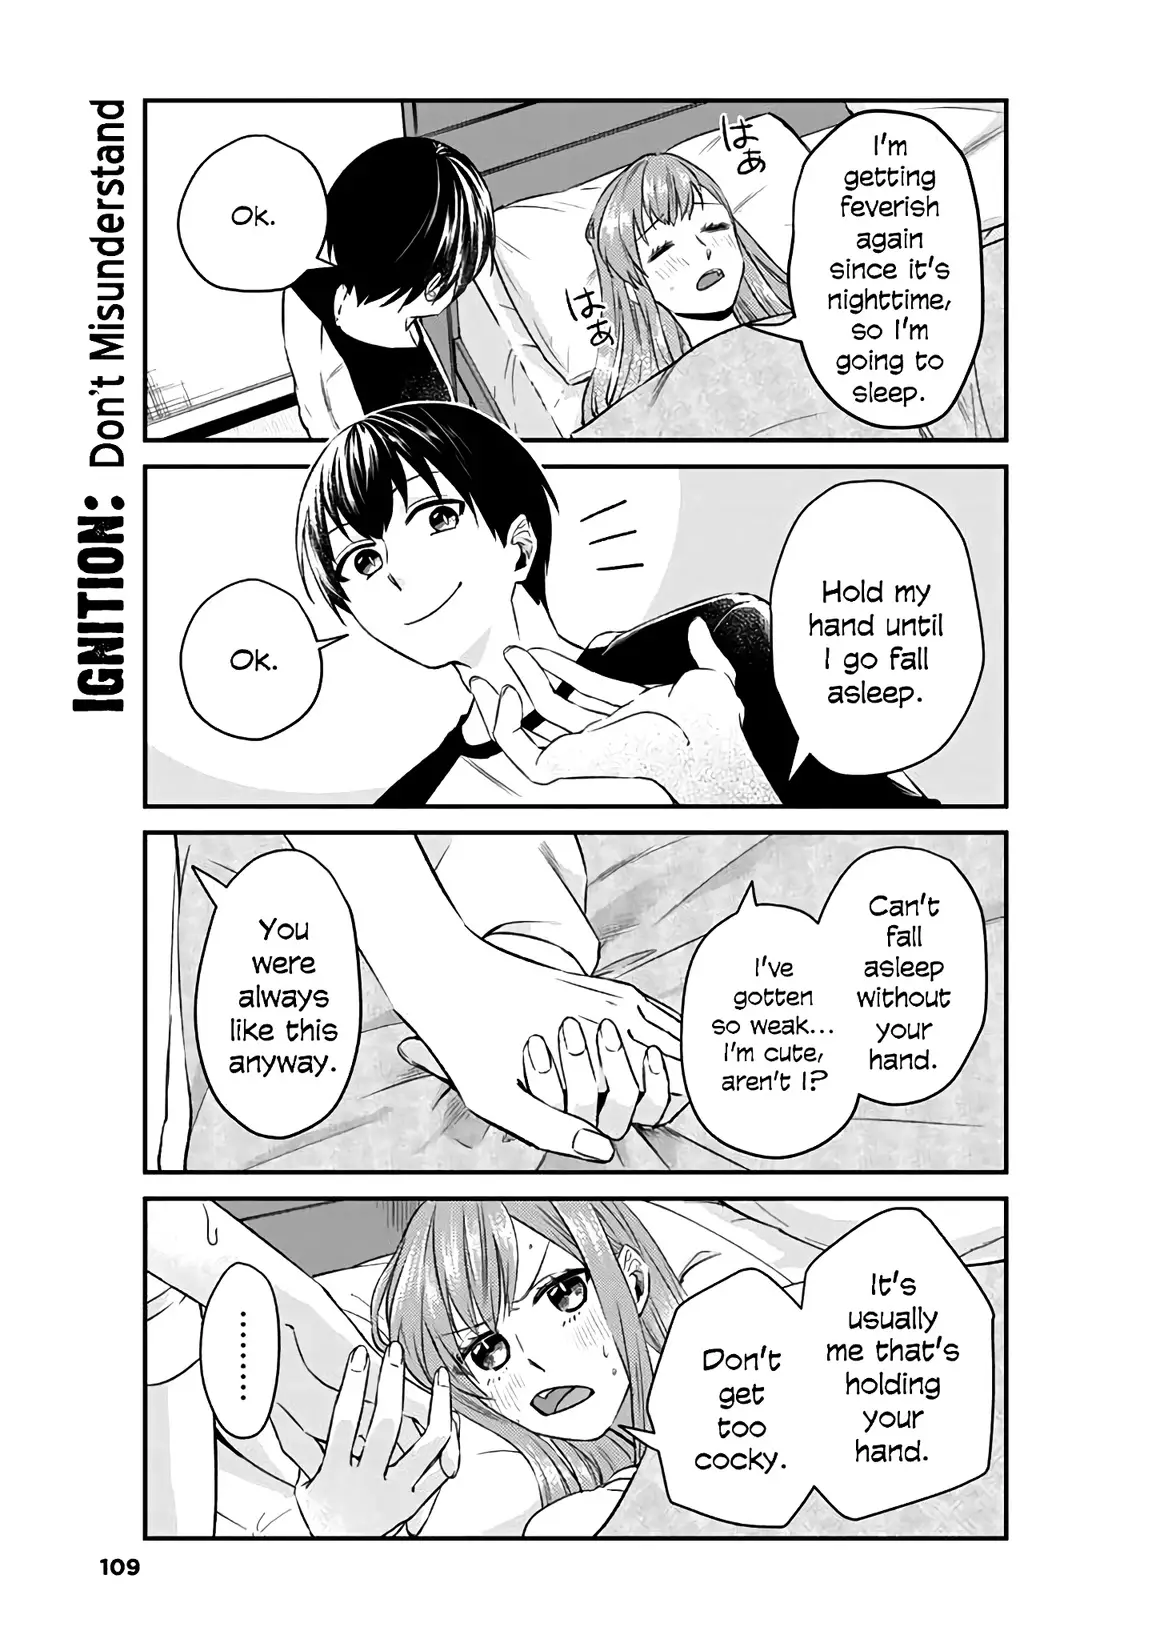 My Perfect Girlfriend! - 8 page 6-8df24033